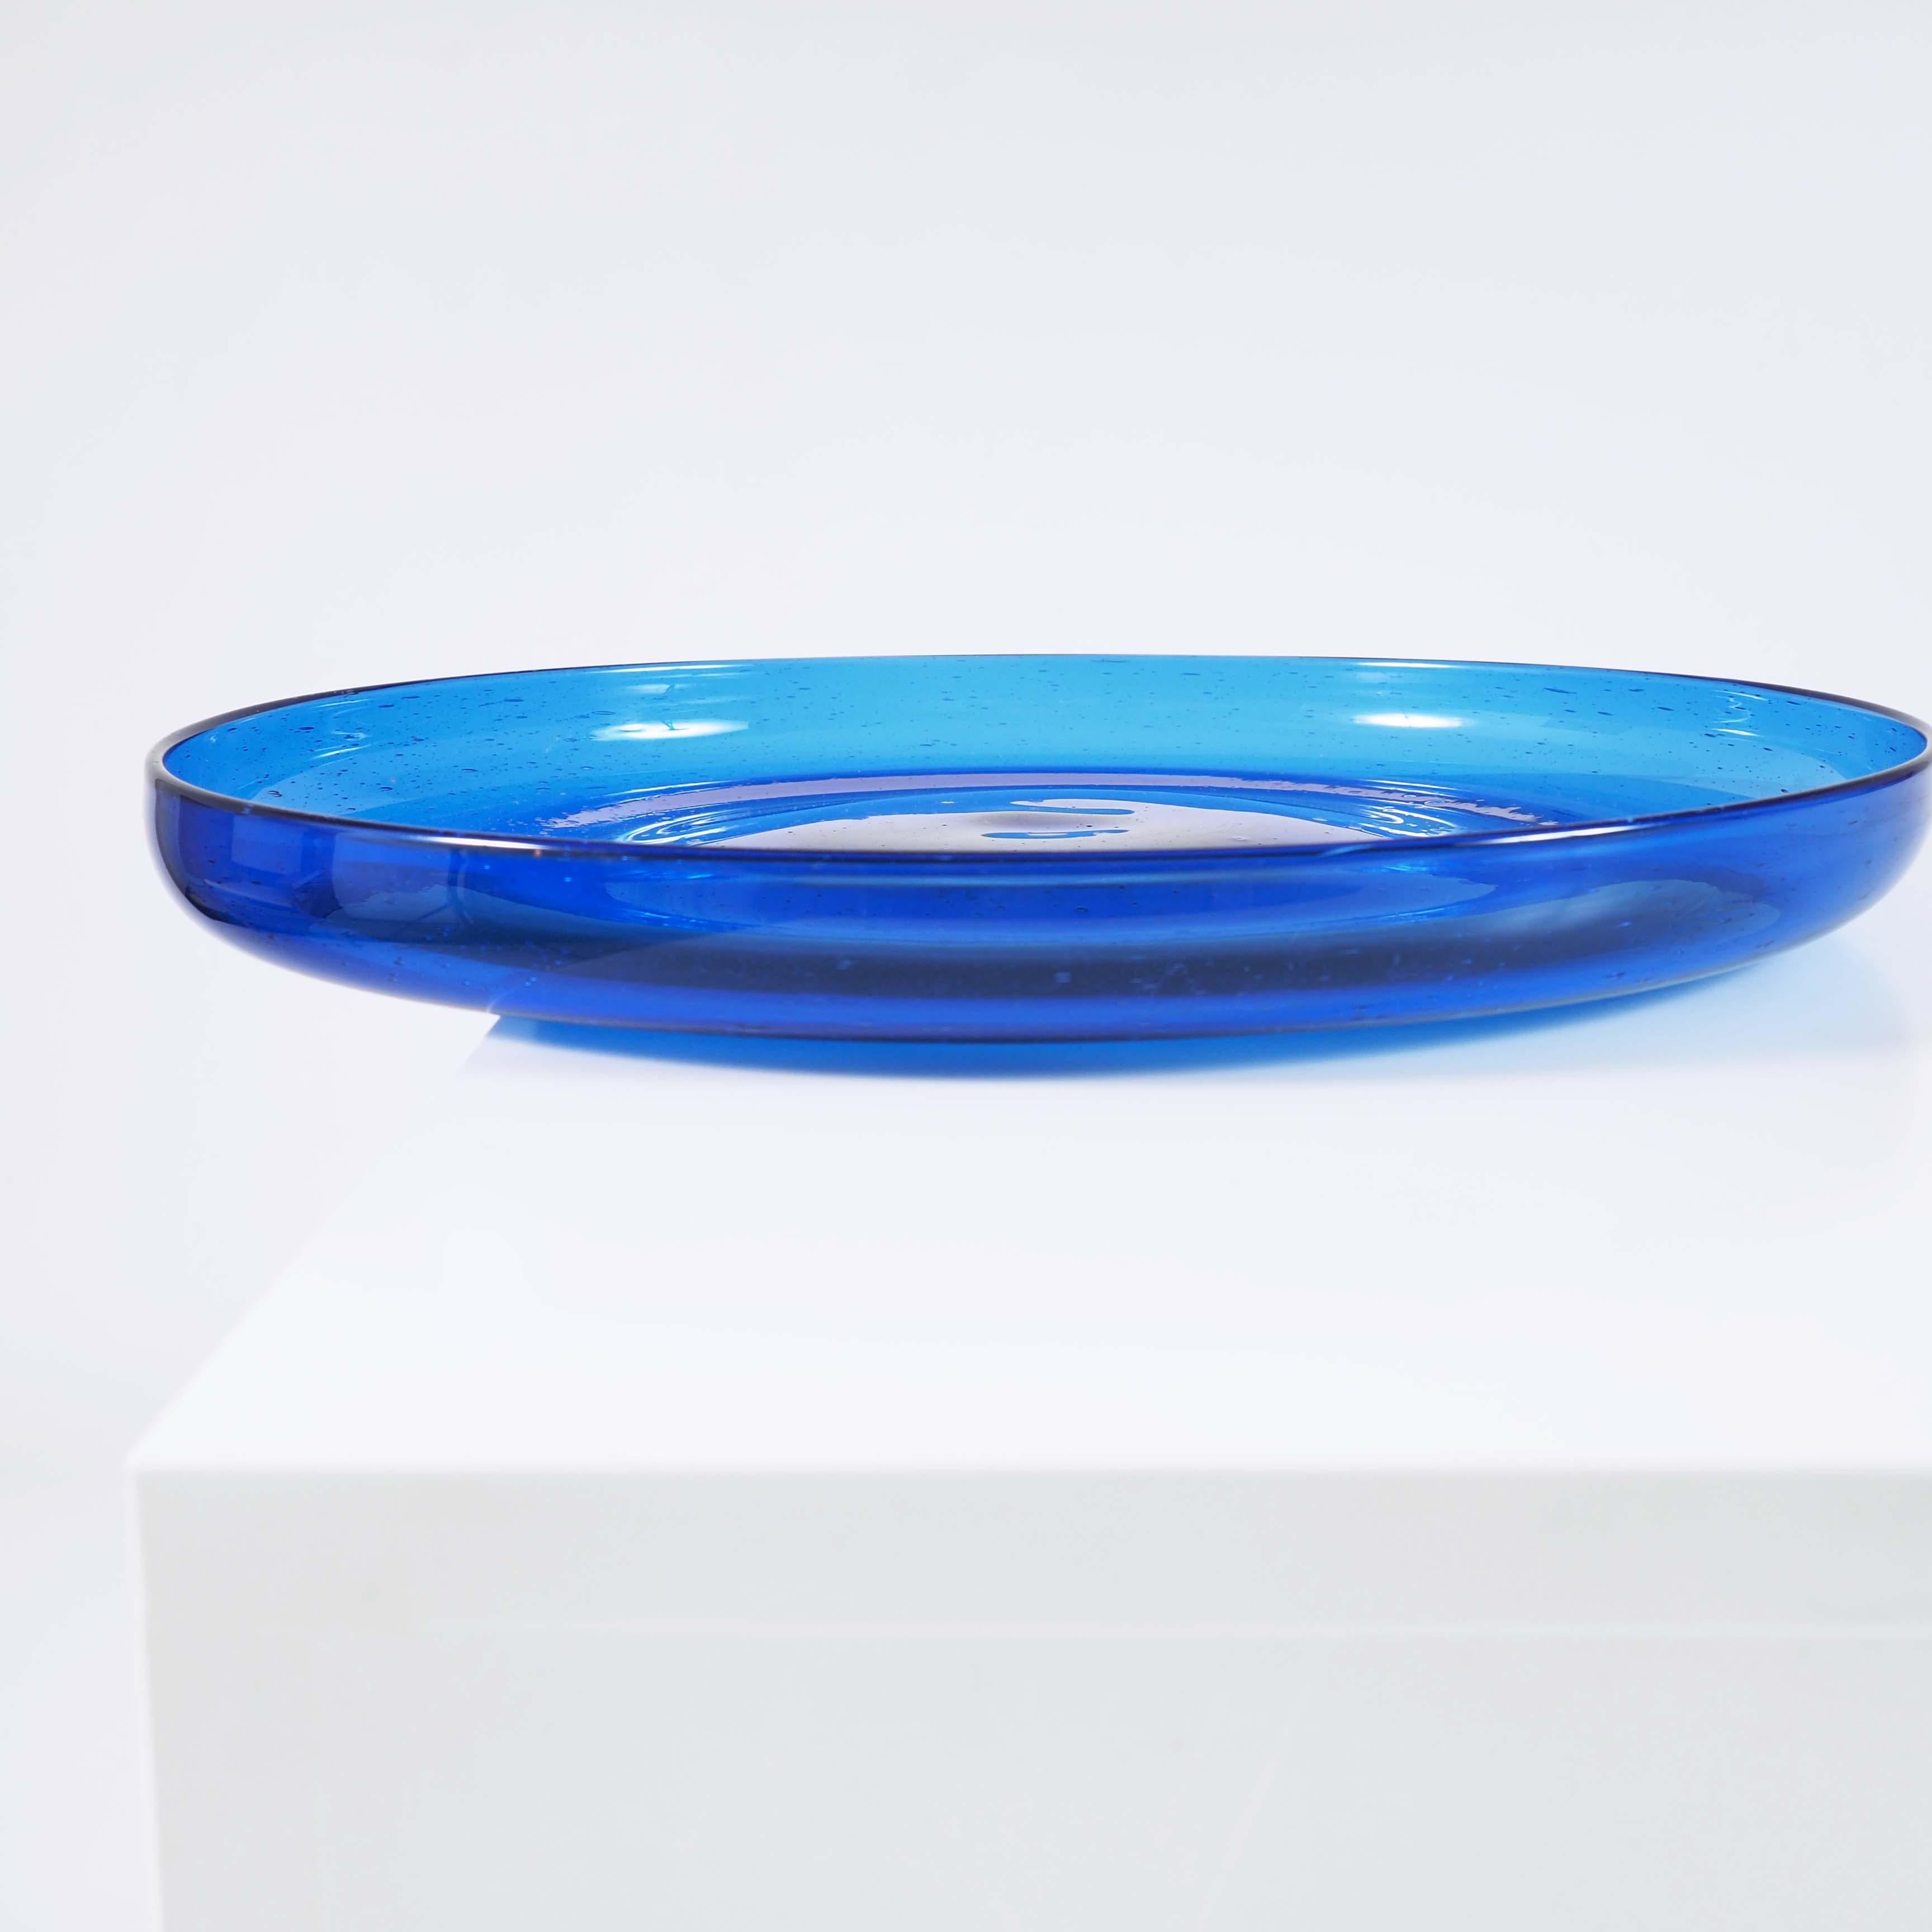 Large hand blown glass tray by Erik Höglund, made at Boda glassworks. The tray is typical for Höglund's rustic style, with irregular bubbles in the glass. Höglund was bored by the perfection of the 1950s and experimented with different ways to make